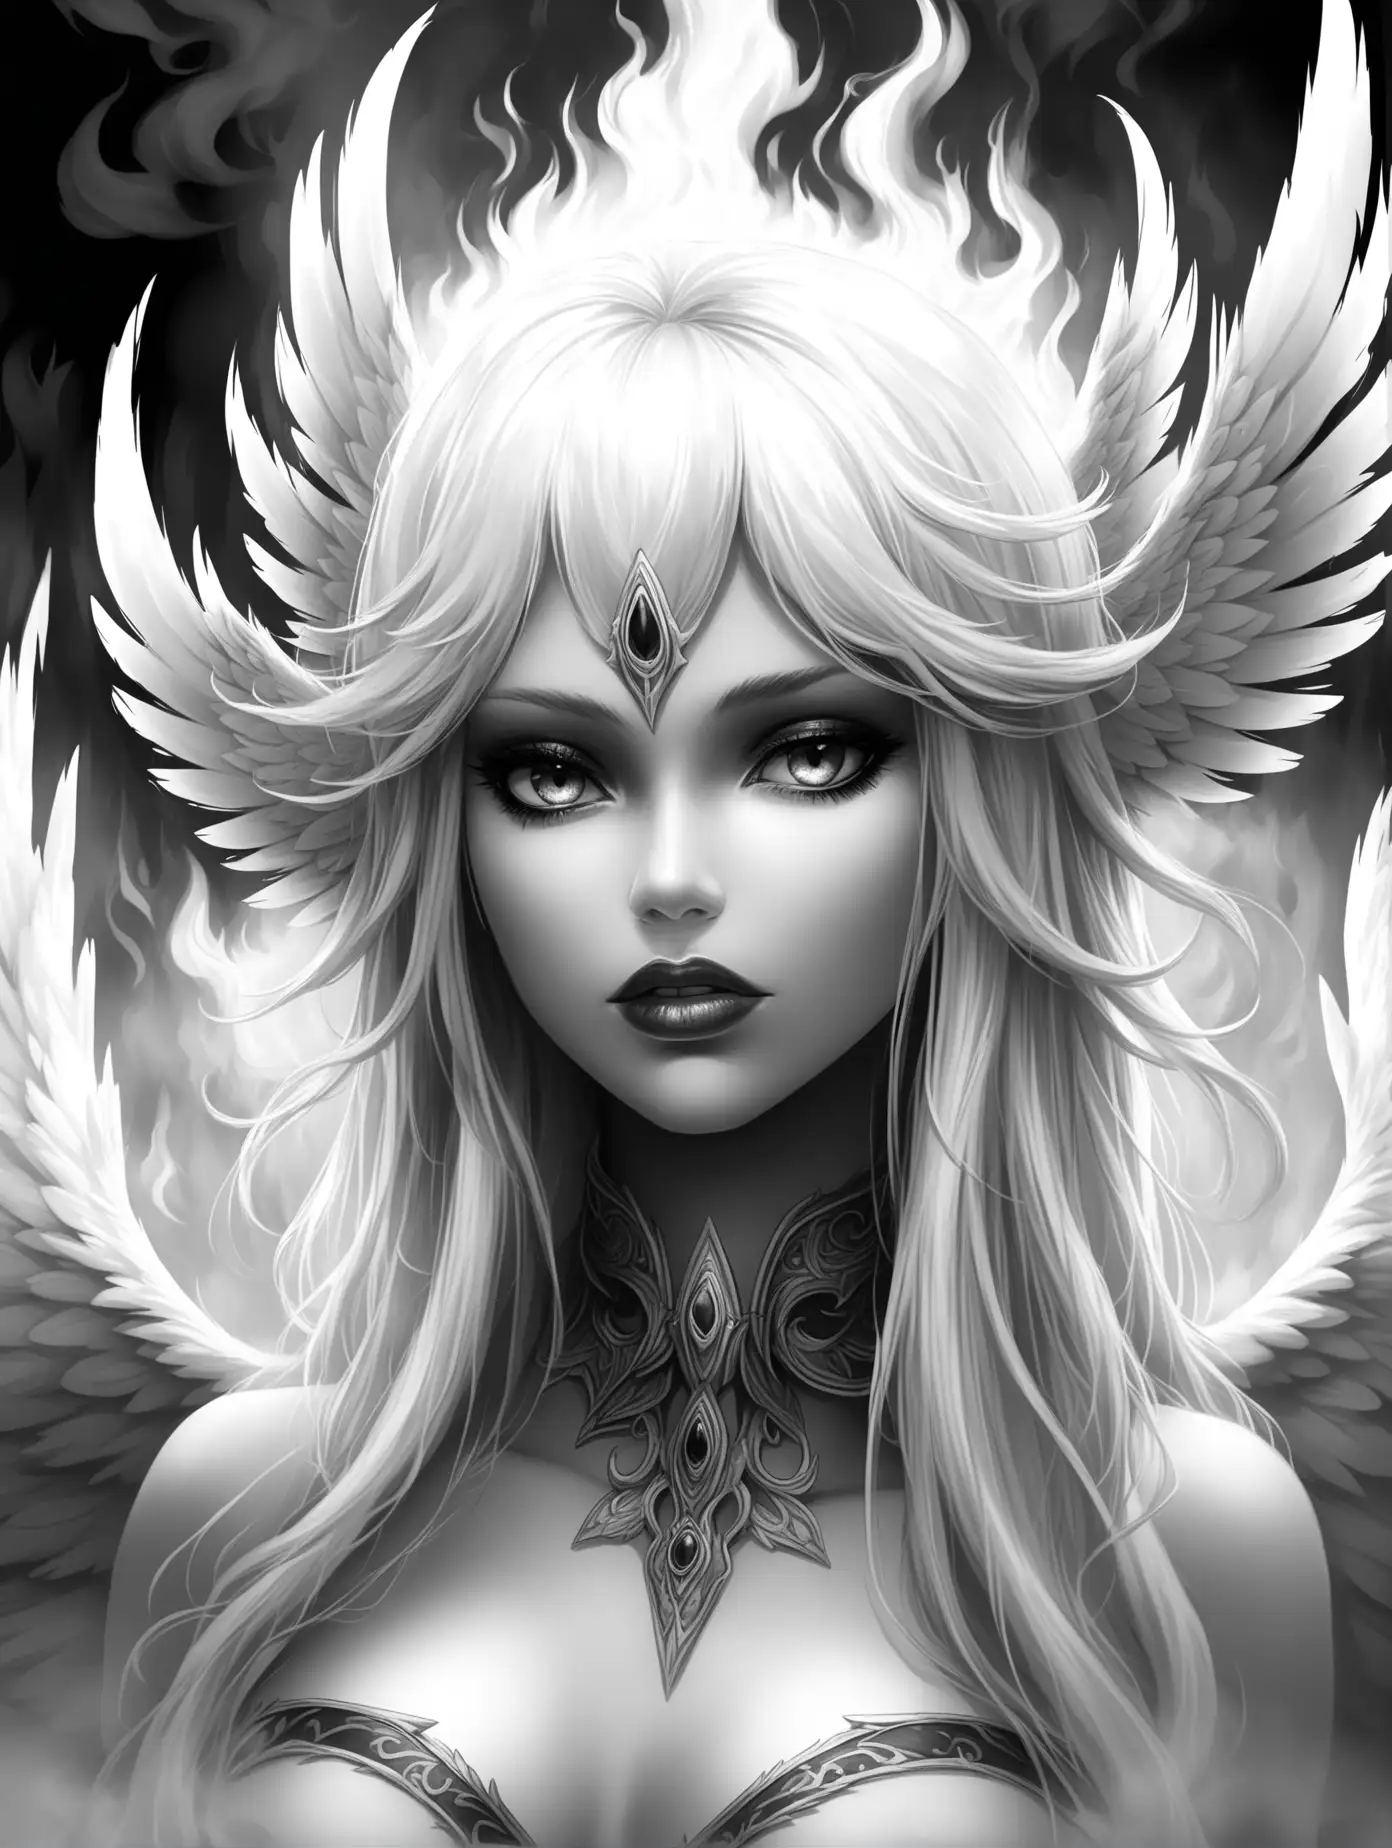 Seductive Harpie Portrait in Monochrome with Ethereal Elements